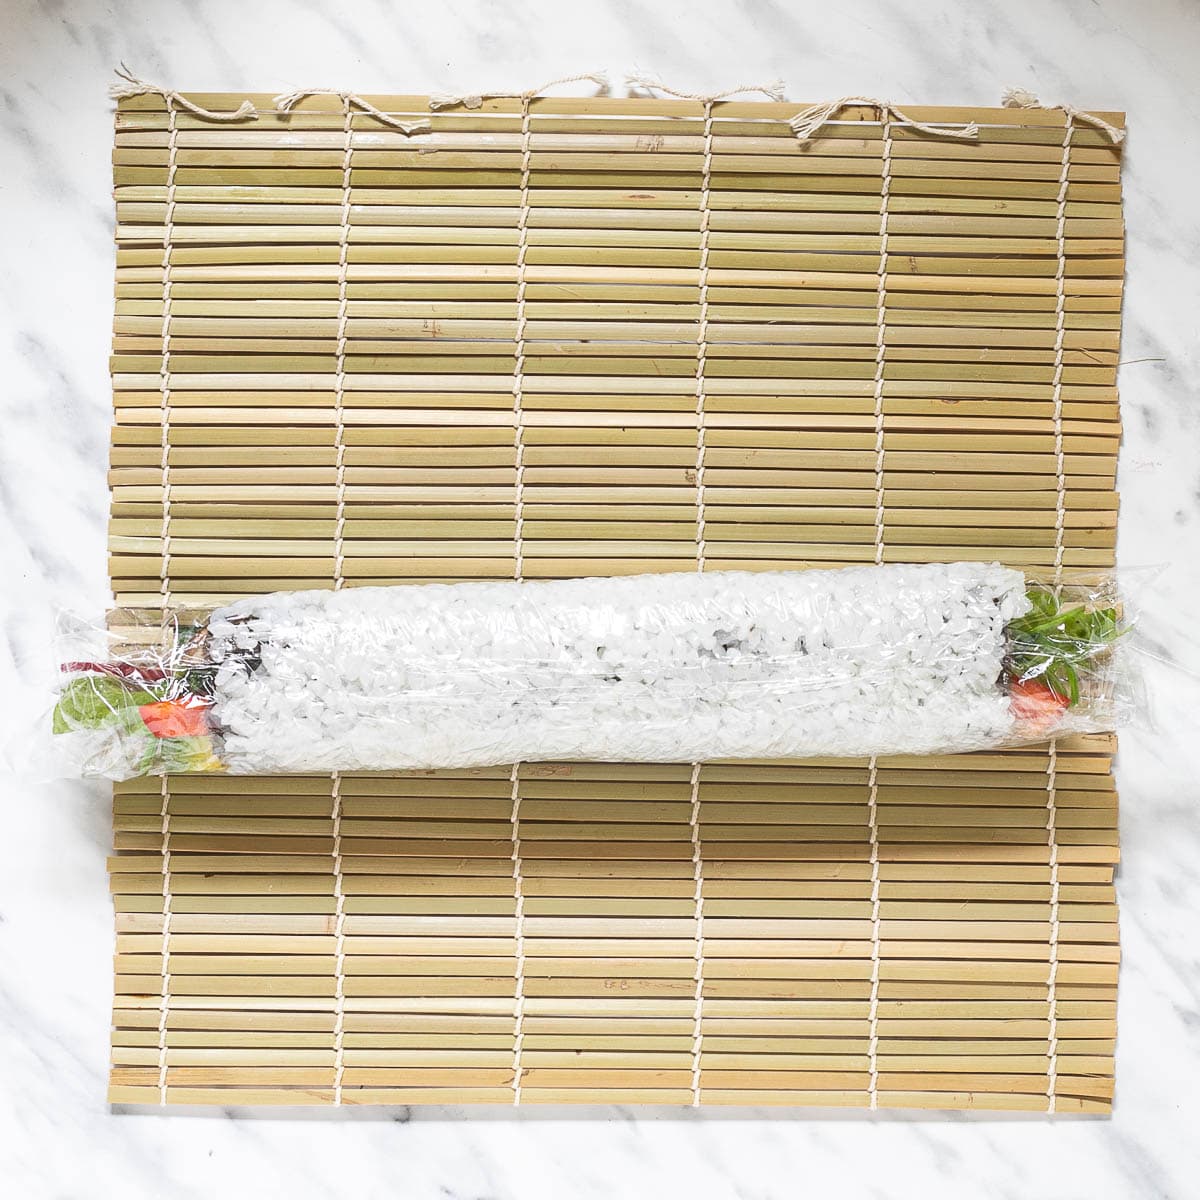 A long sushi roll wrapped in plastic wrap on top of a bamboo mat.